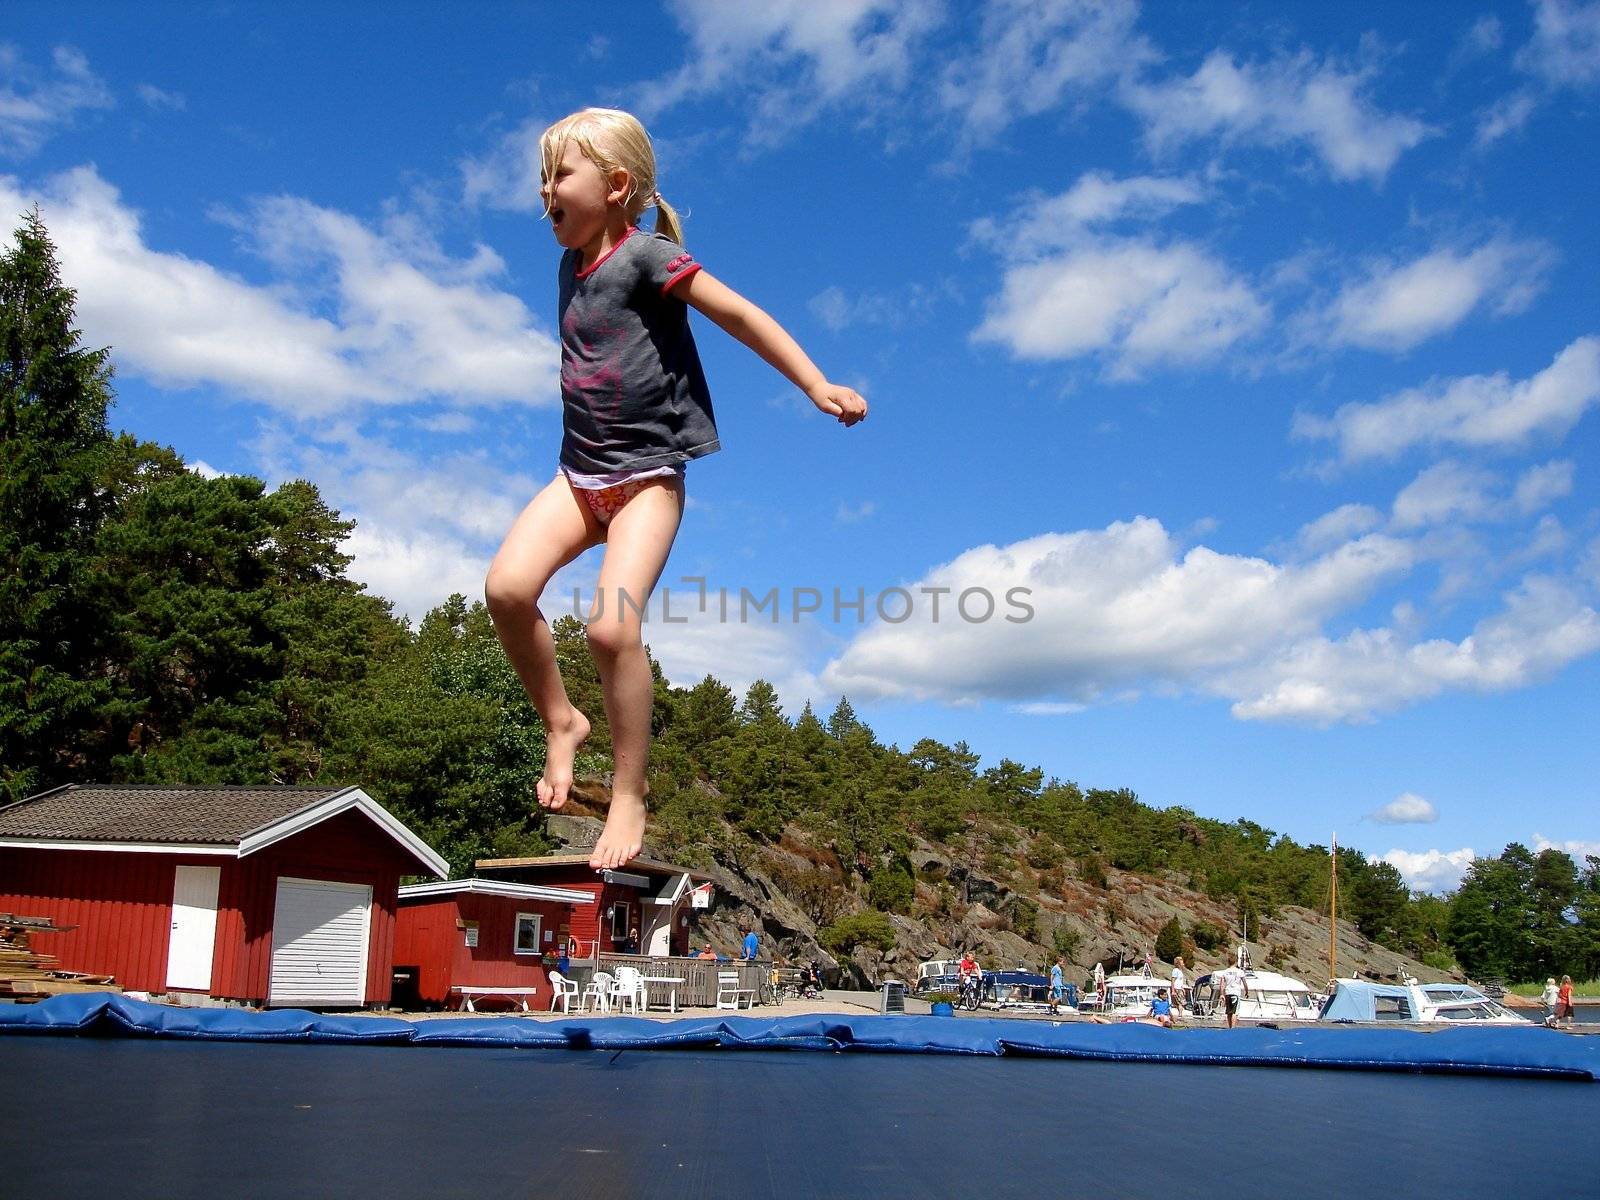 children playing on the trampoline. Please note: No negative use allowed.